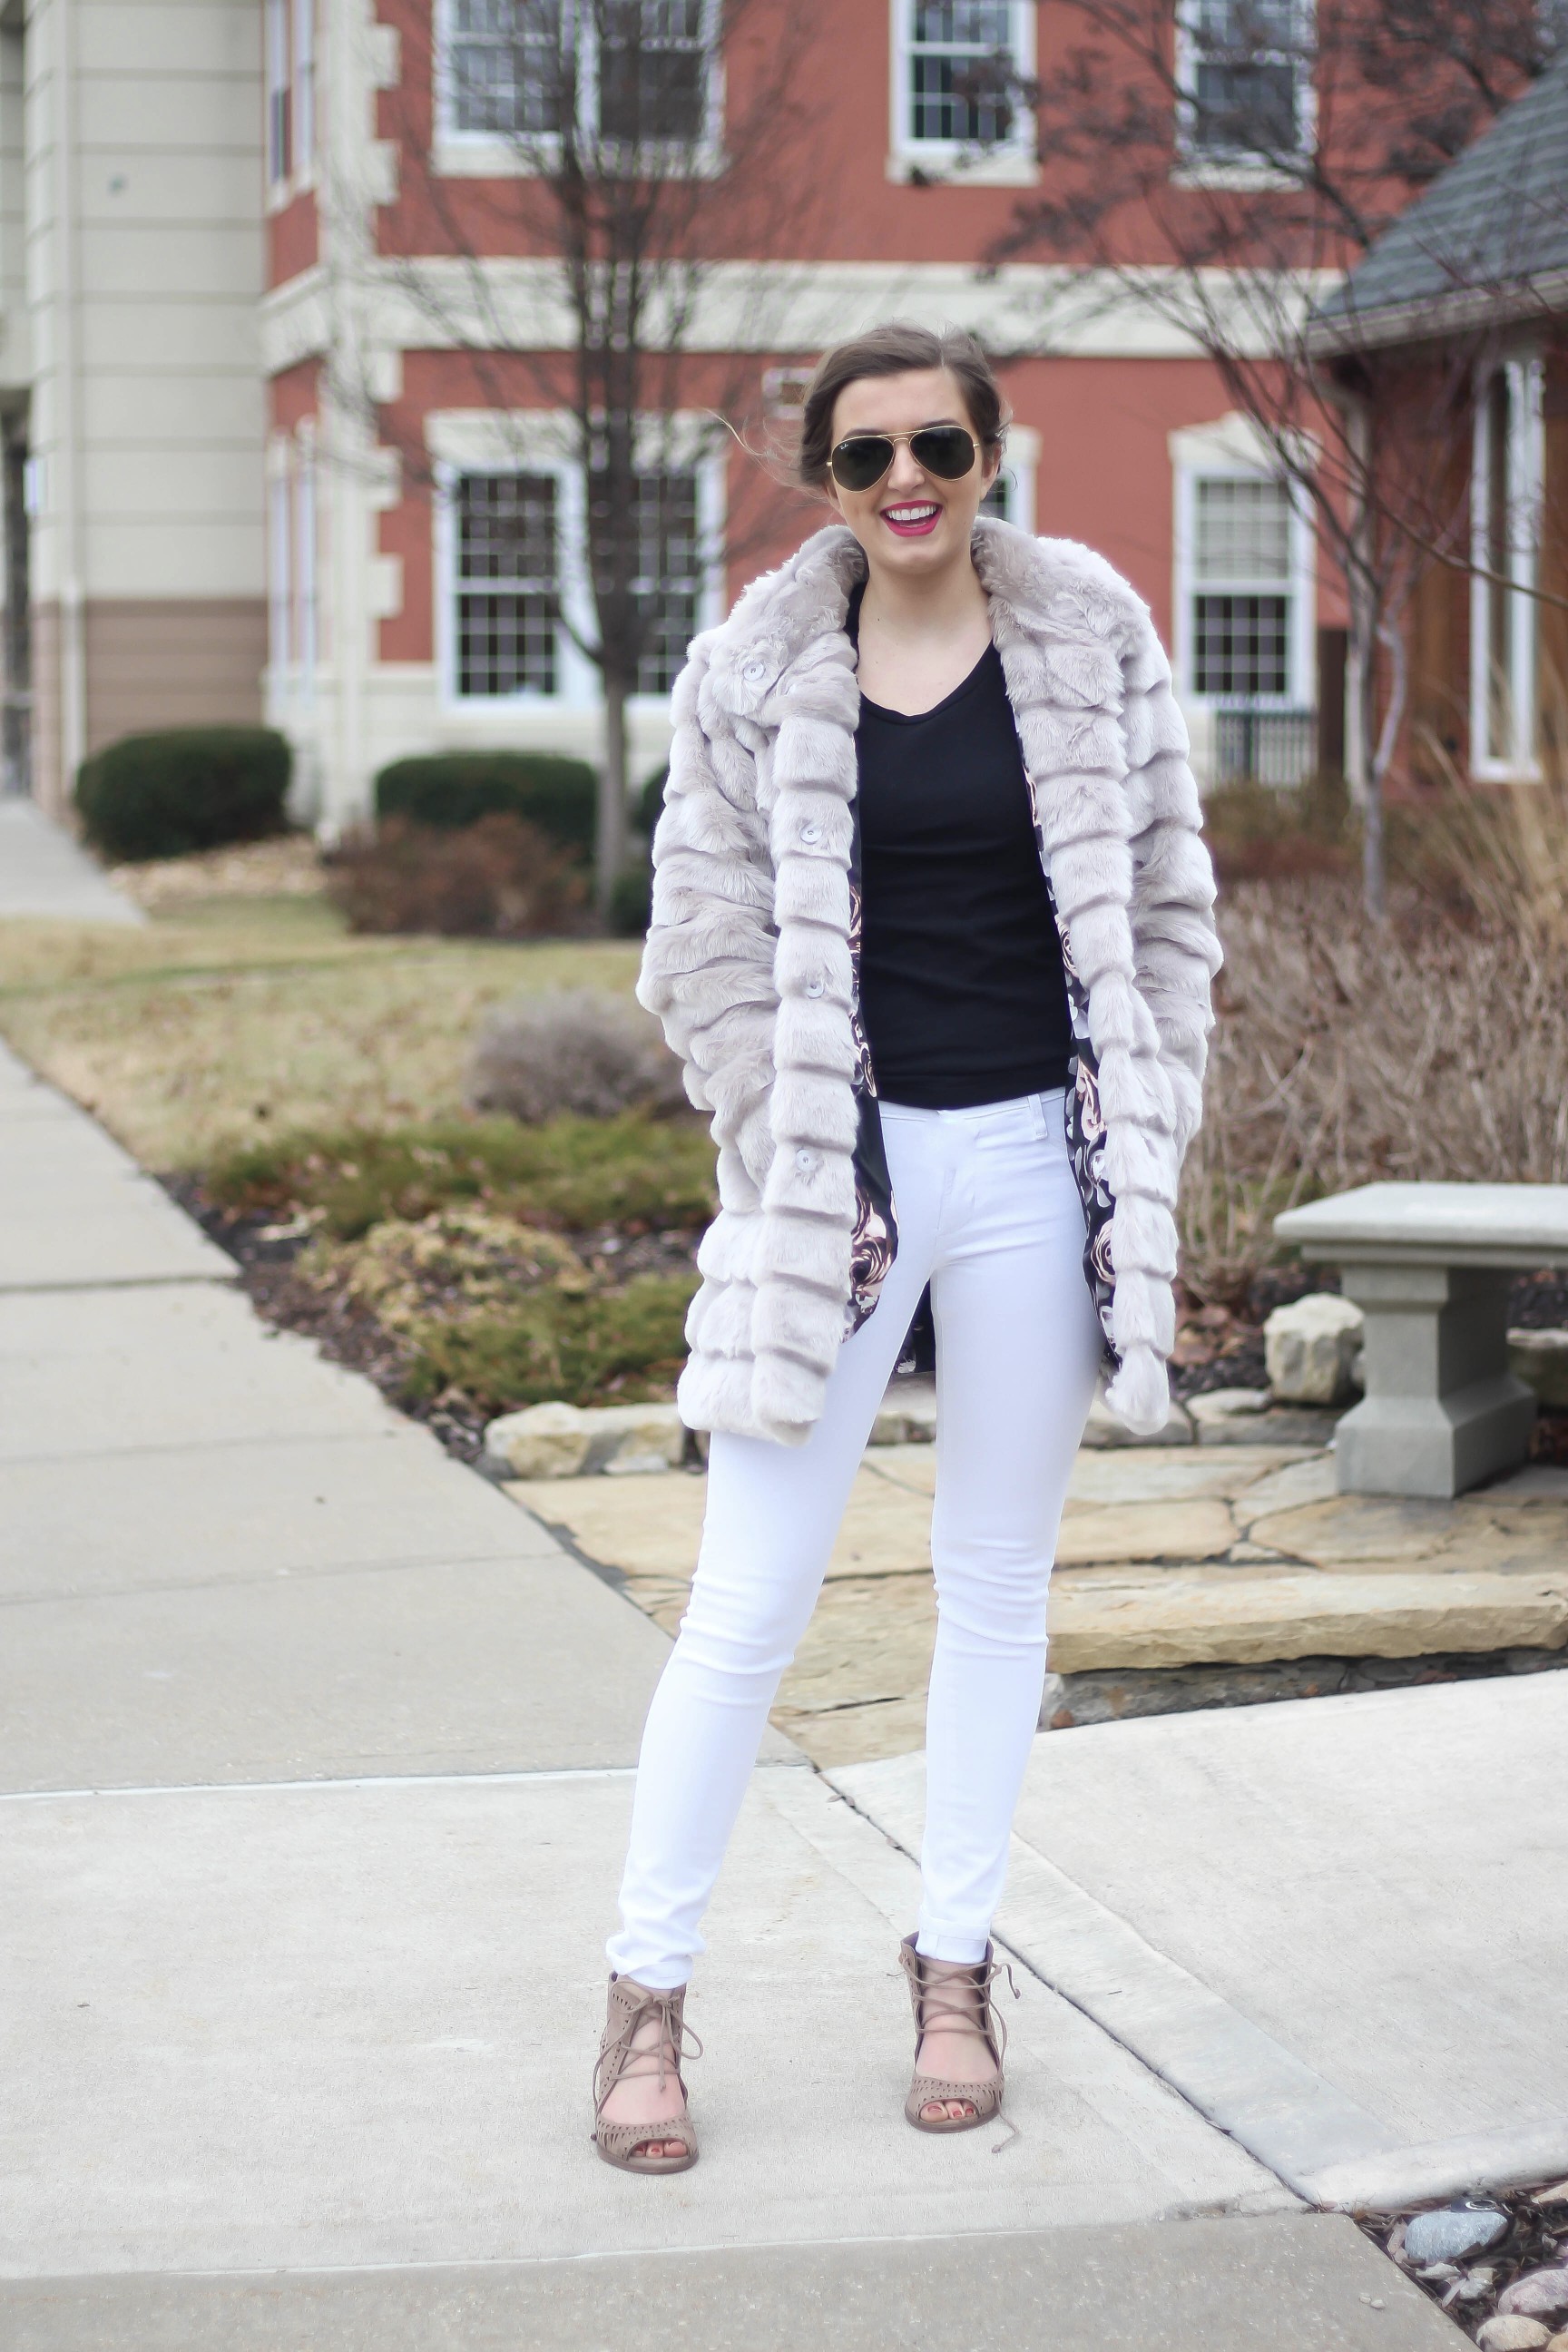 Fur coats are a closet necessity! This faux fur coat is my favorite and look adorable with white pants, cute heels, and bright pink lips! By Lauren Lindmark on dailydoseofcharm.com daily dose of charm